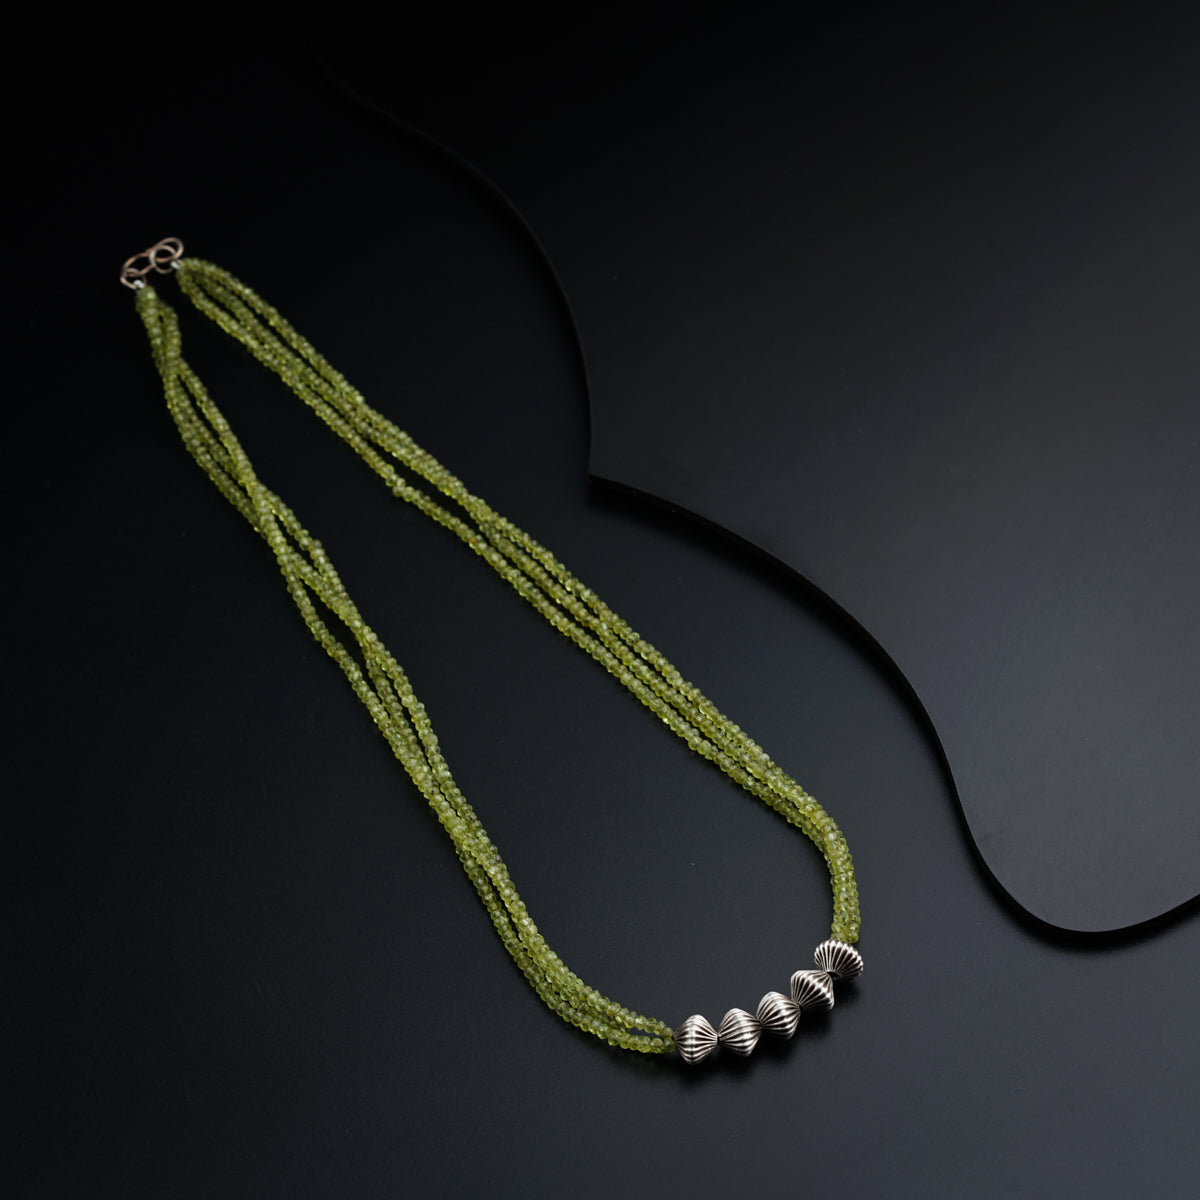 Peridot and silver beads necklace